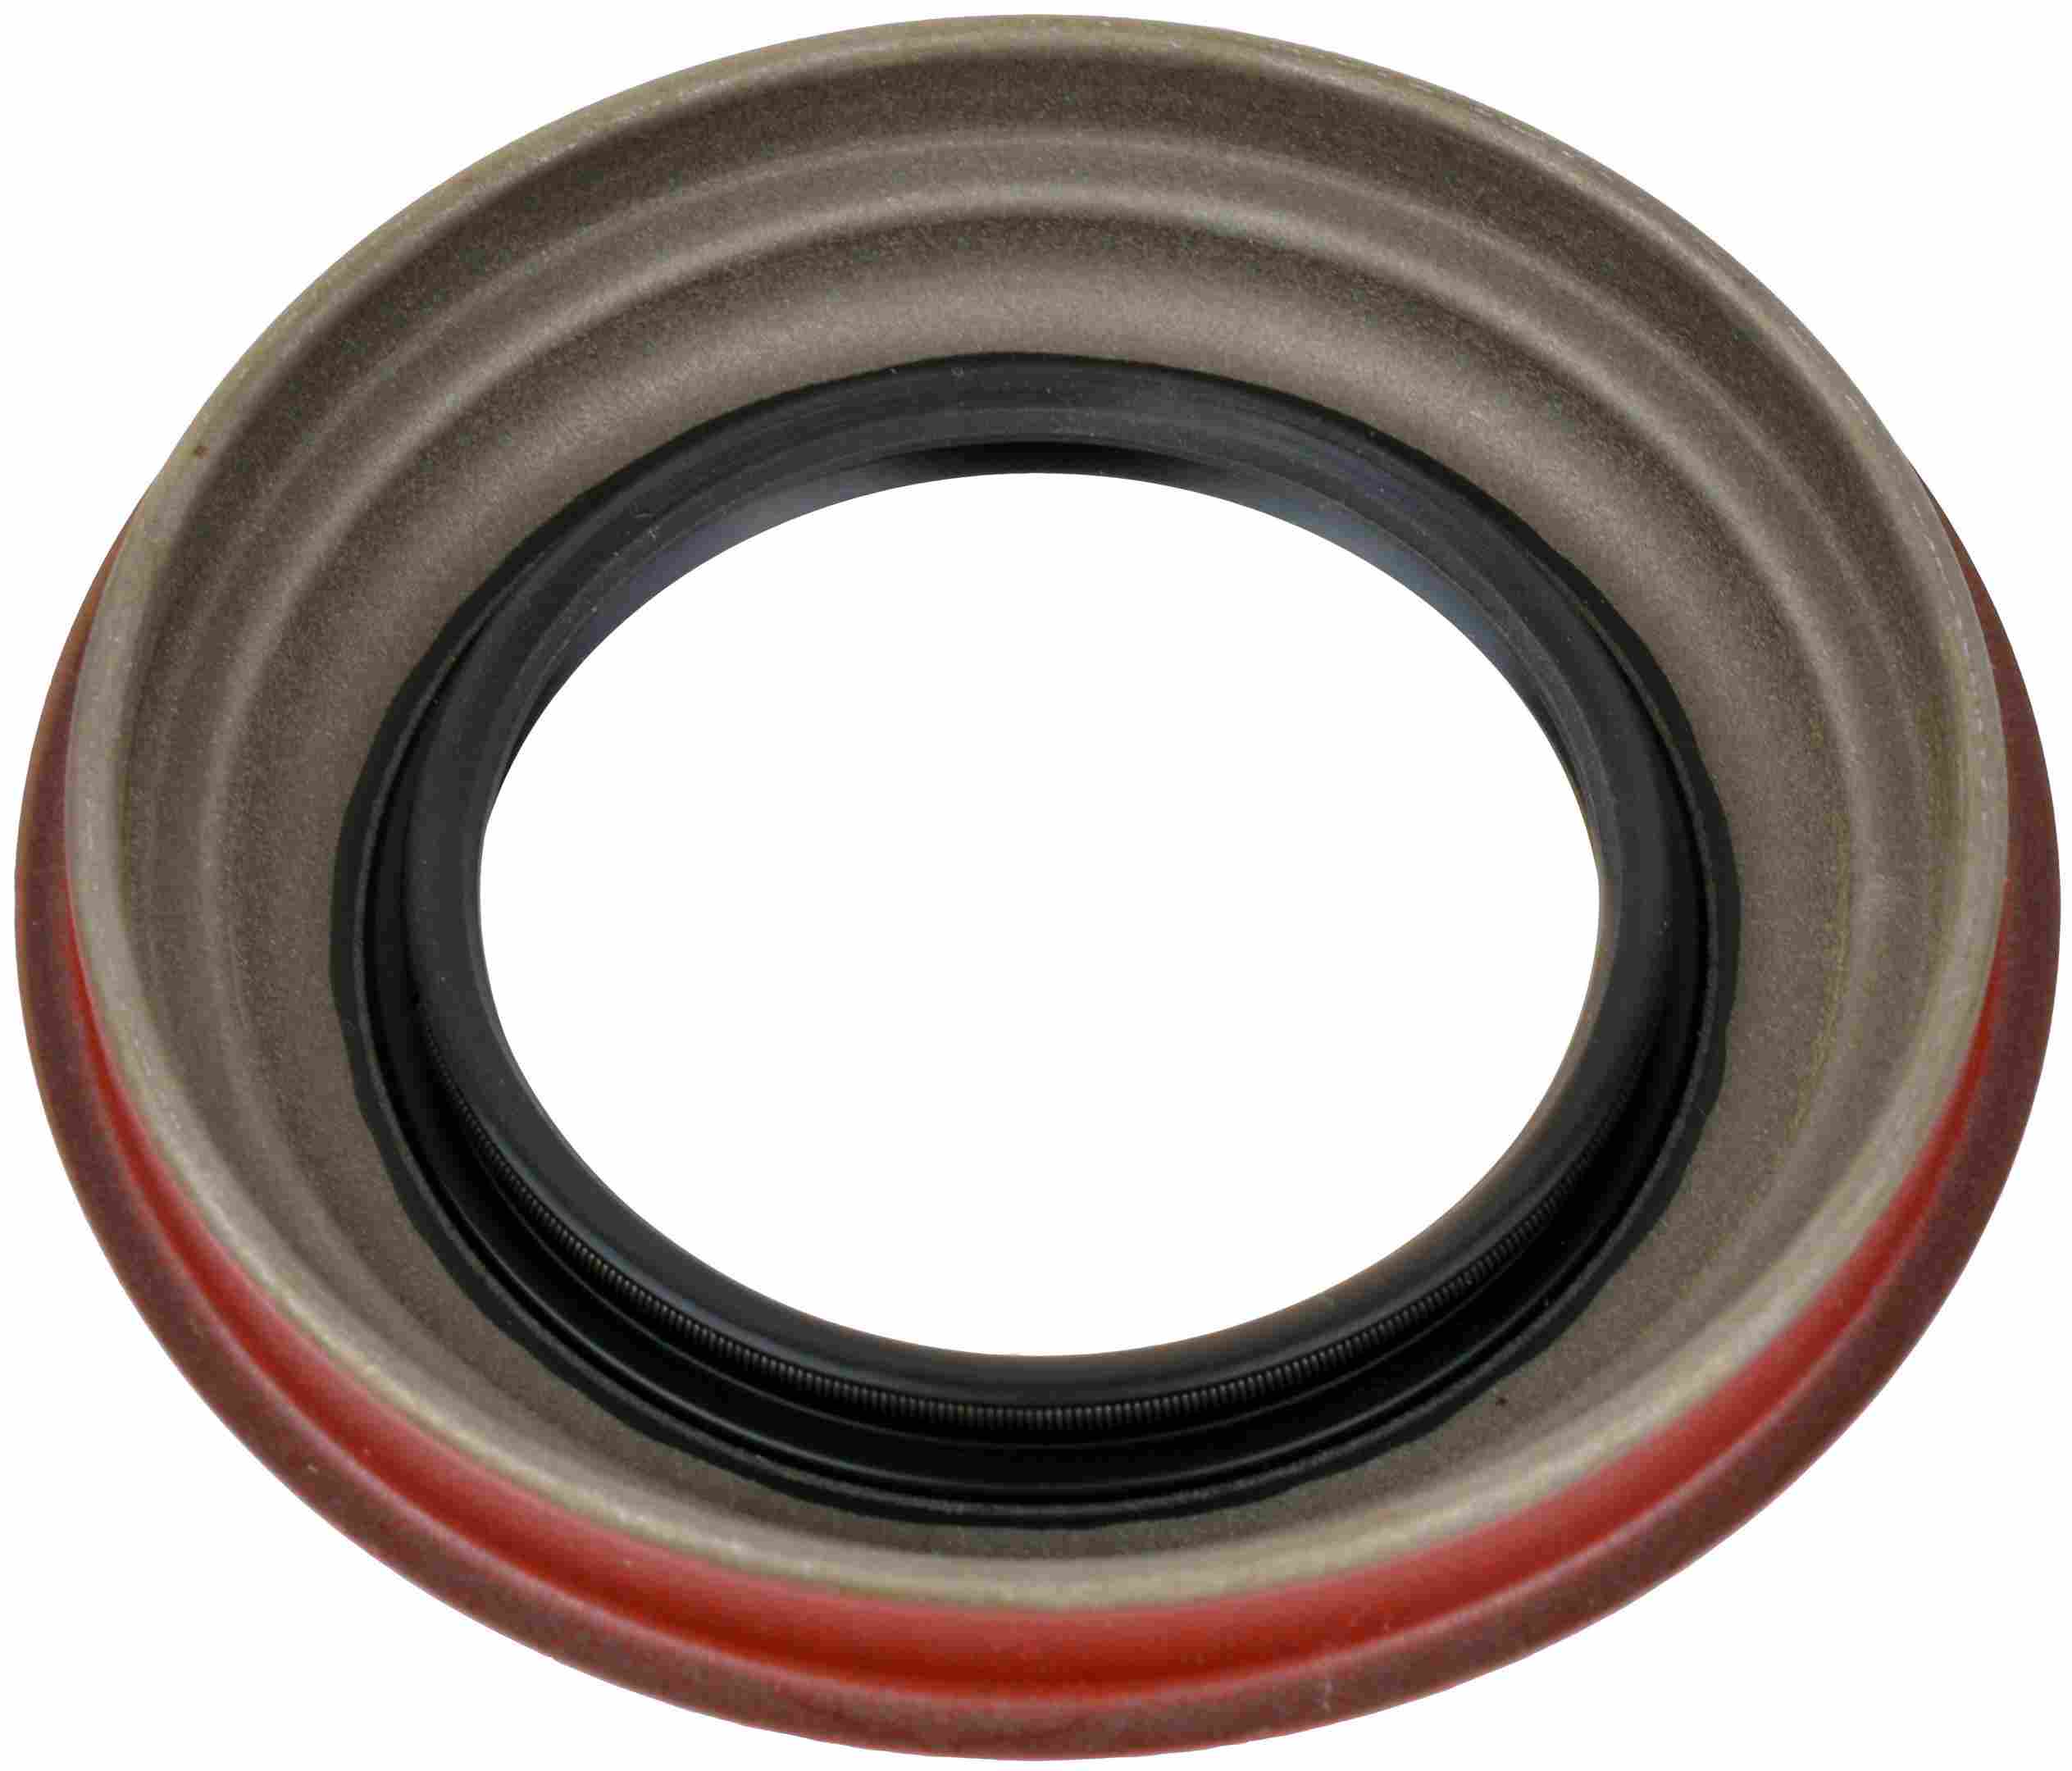 SKF Automatic Transmission Input Shaft Seal  top view frsport 21410